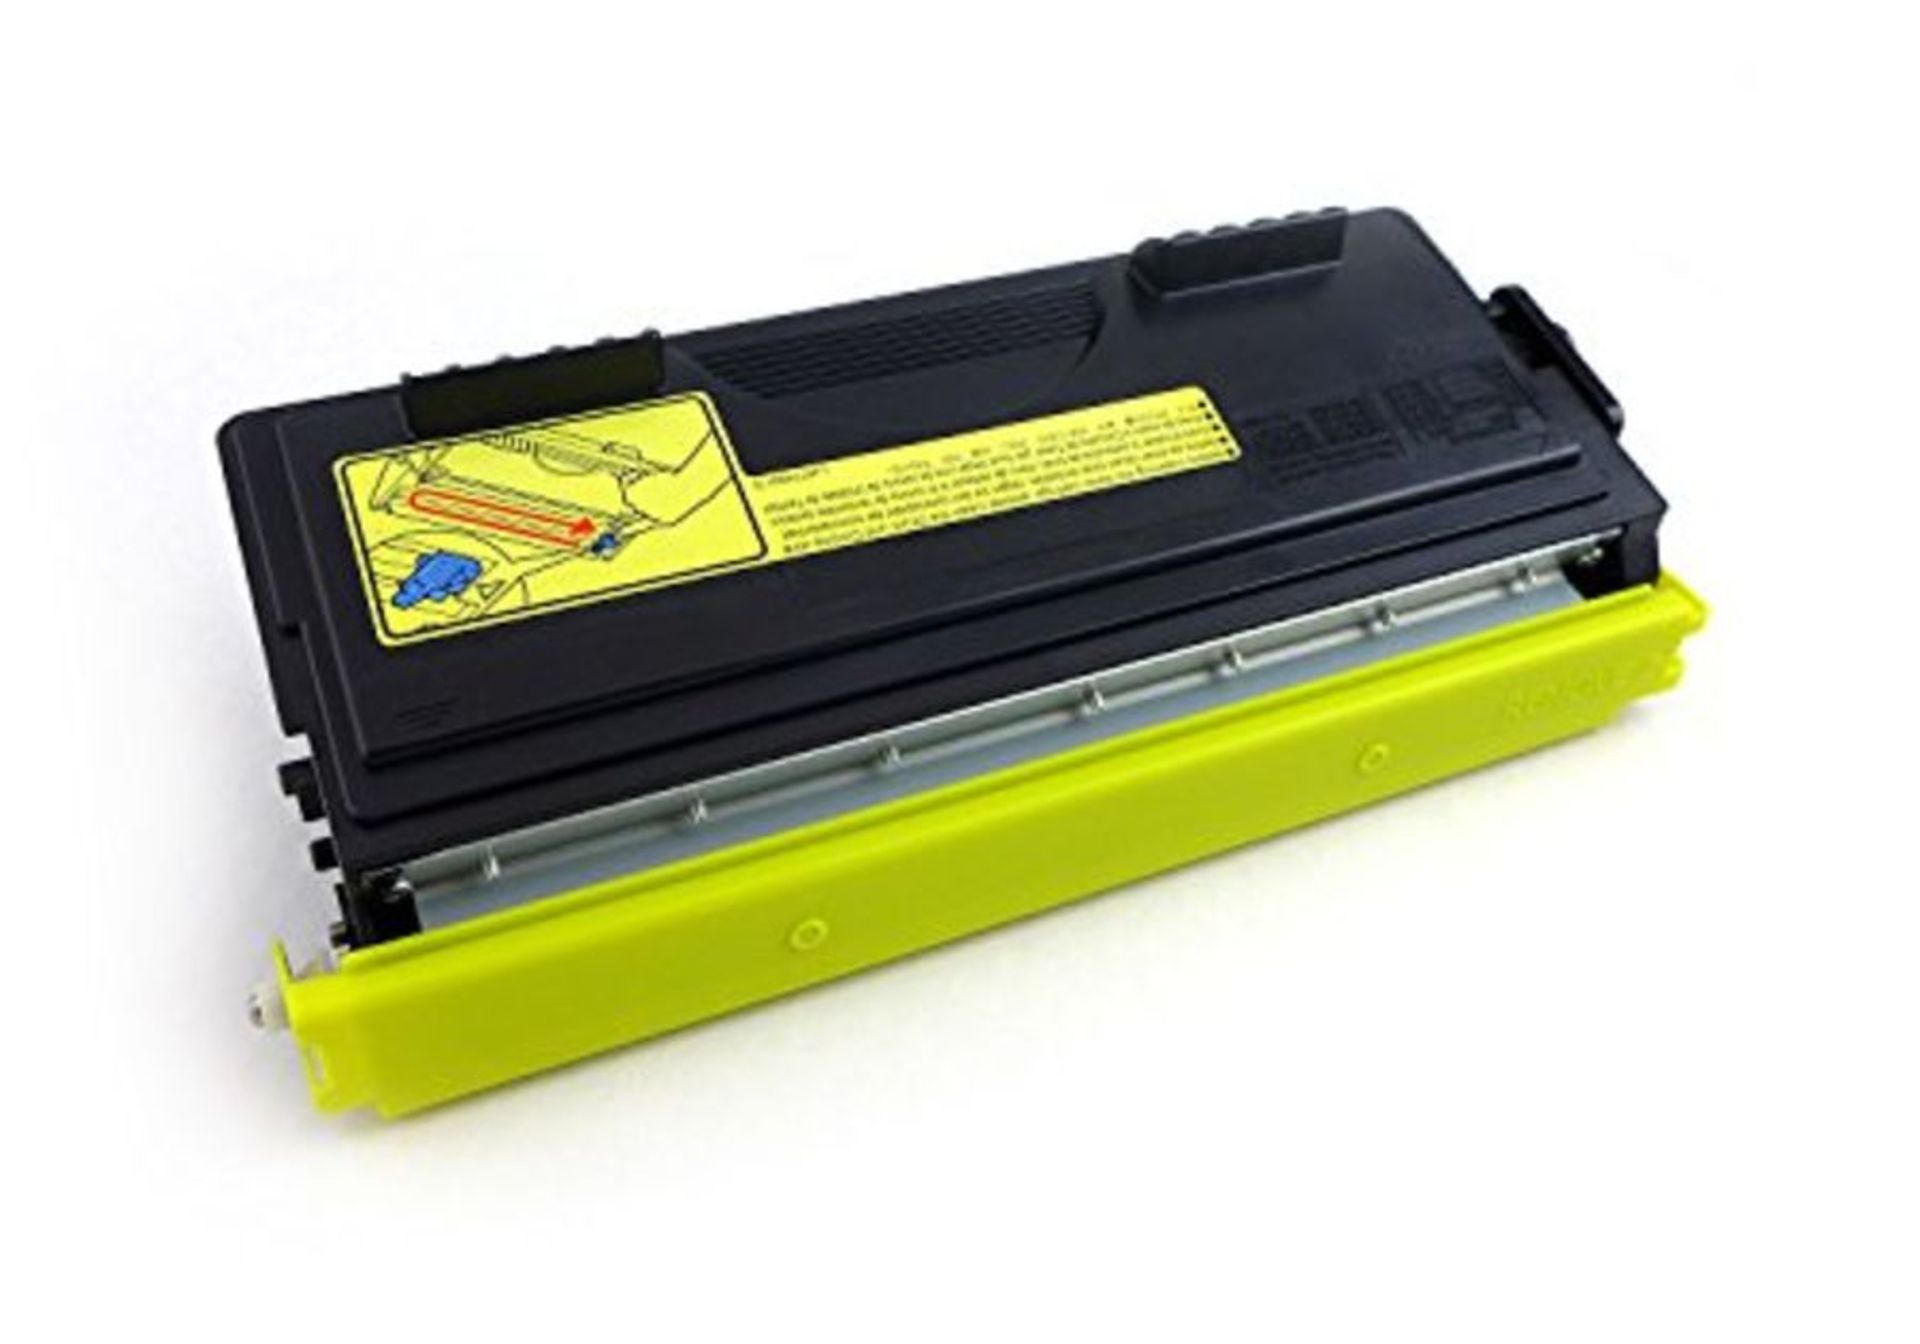 Green2Print Toner black 6000 pages replaces Brother TN-6600 Toner cartridge for Brothe